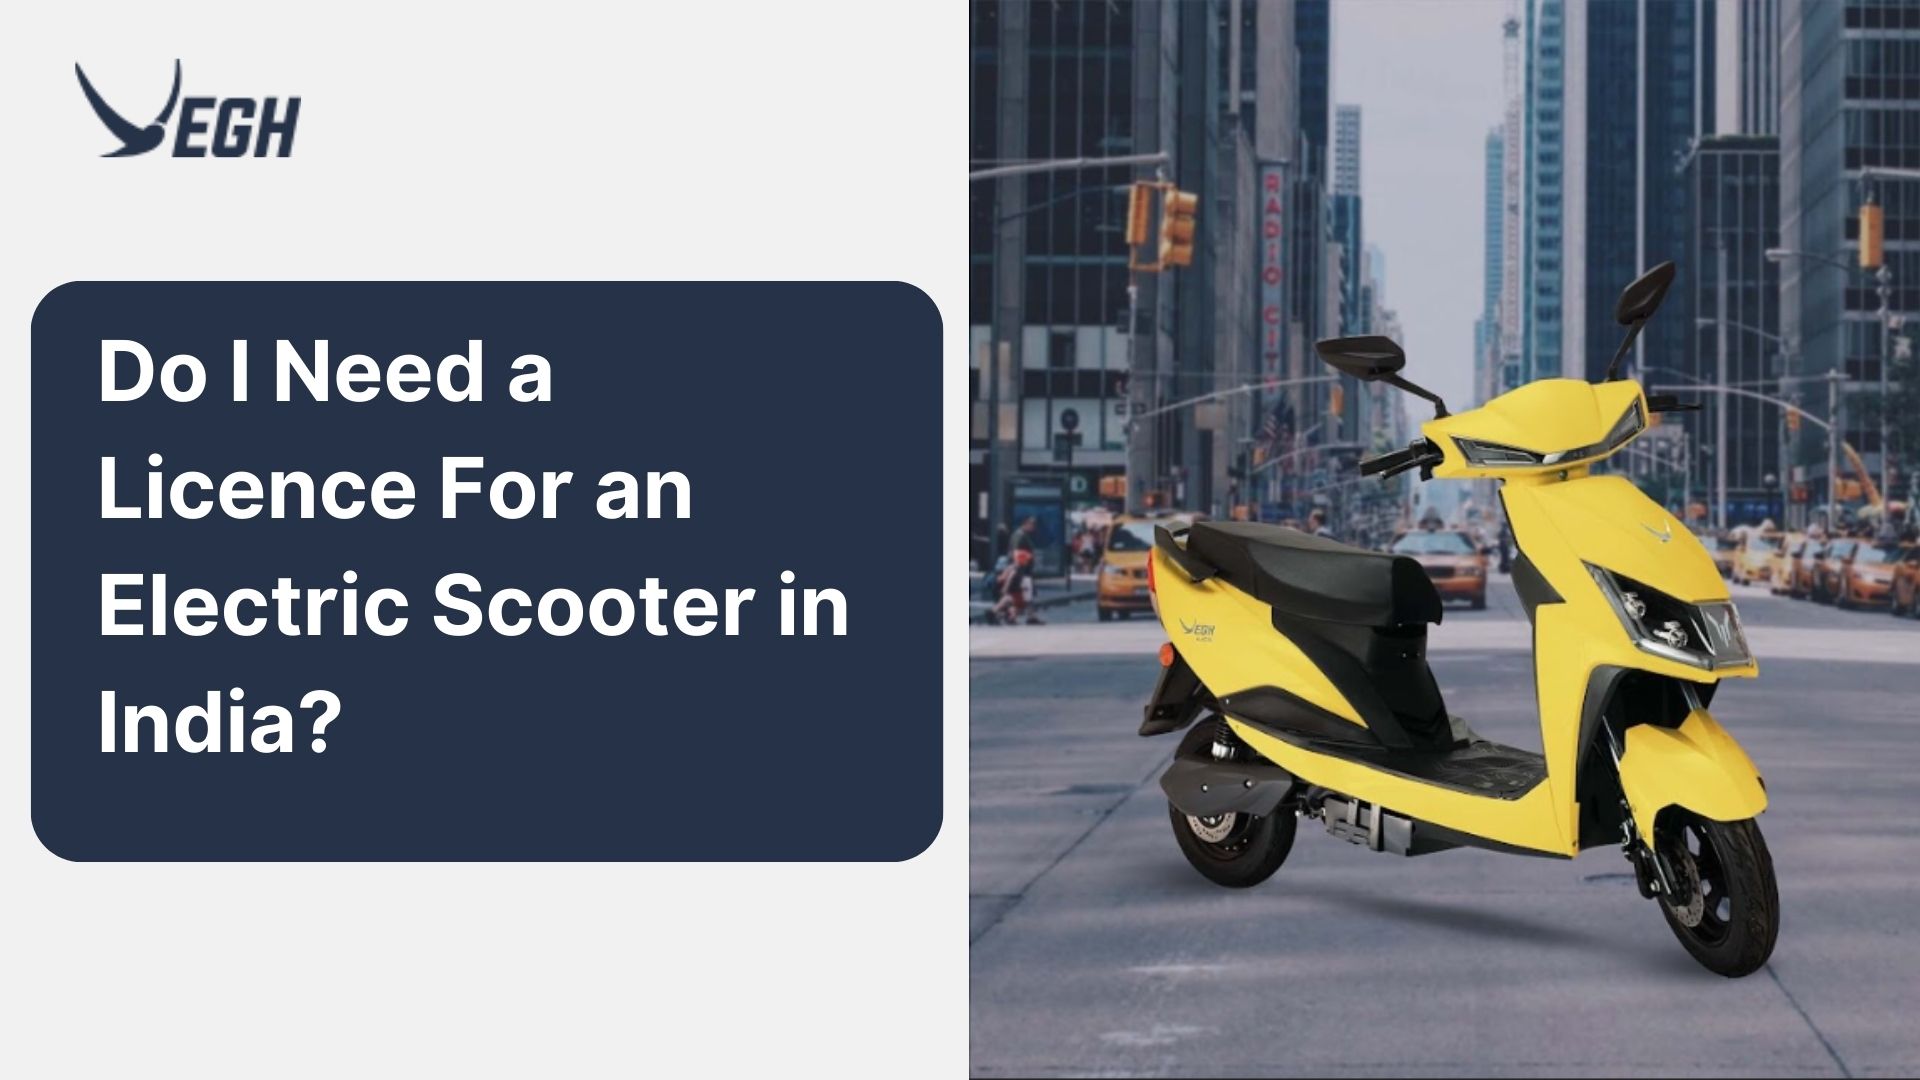 do u need a license to drive an electric scooter